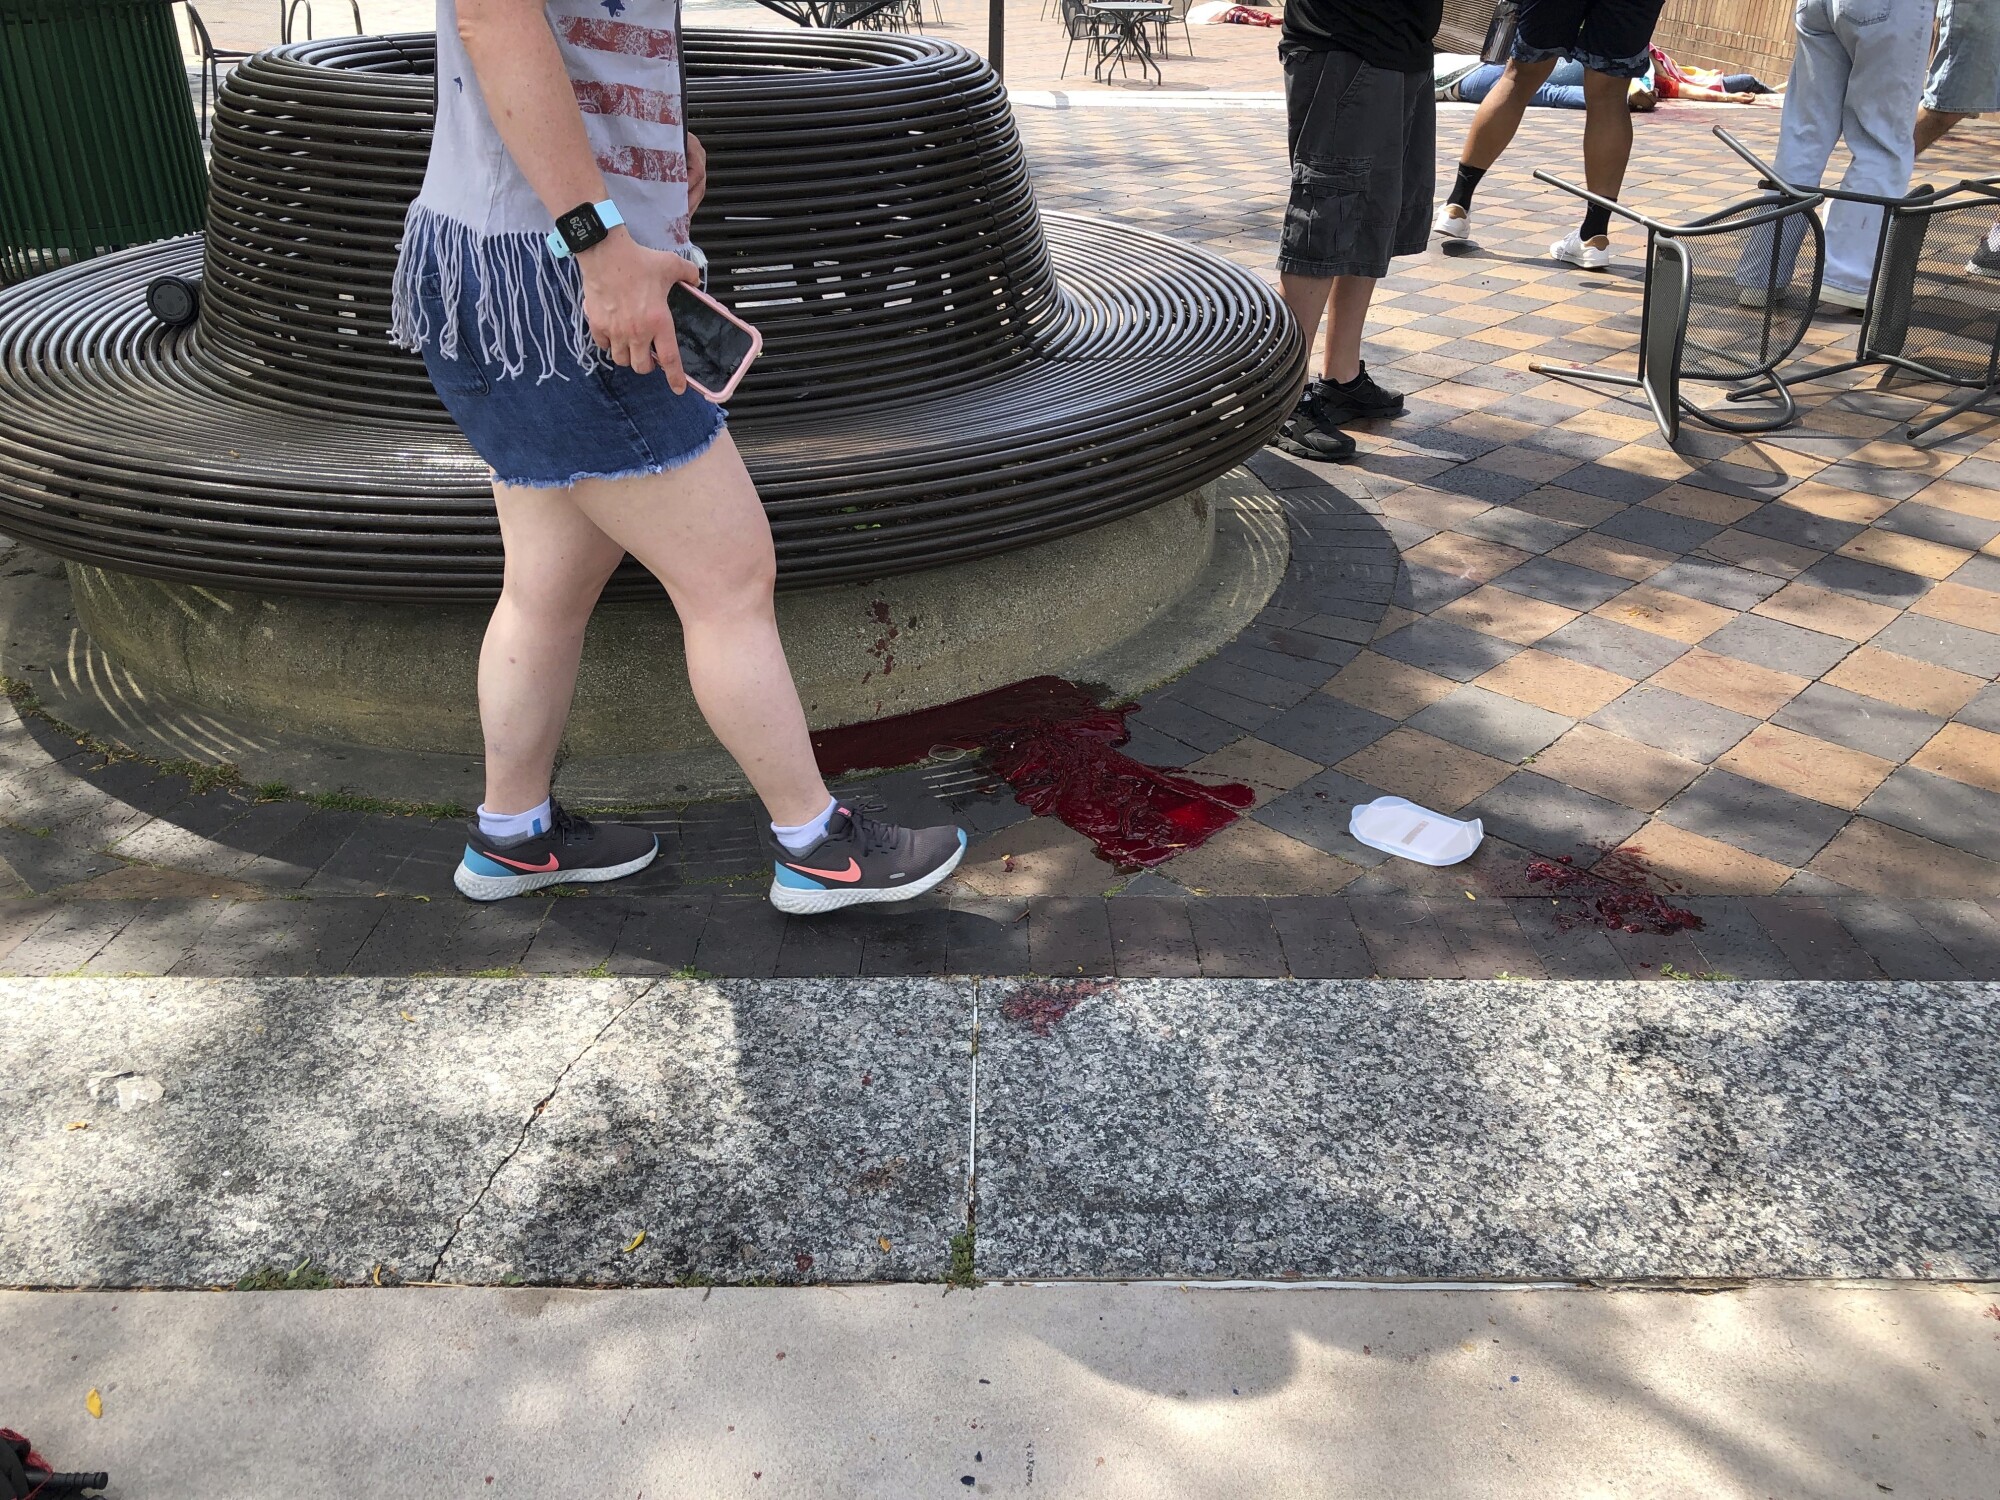 A person stands near a pool of blood on the sidewalk.